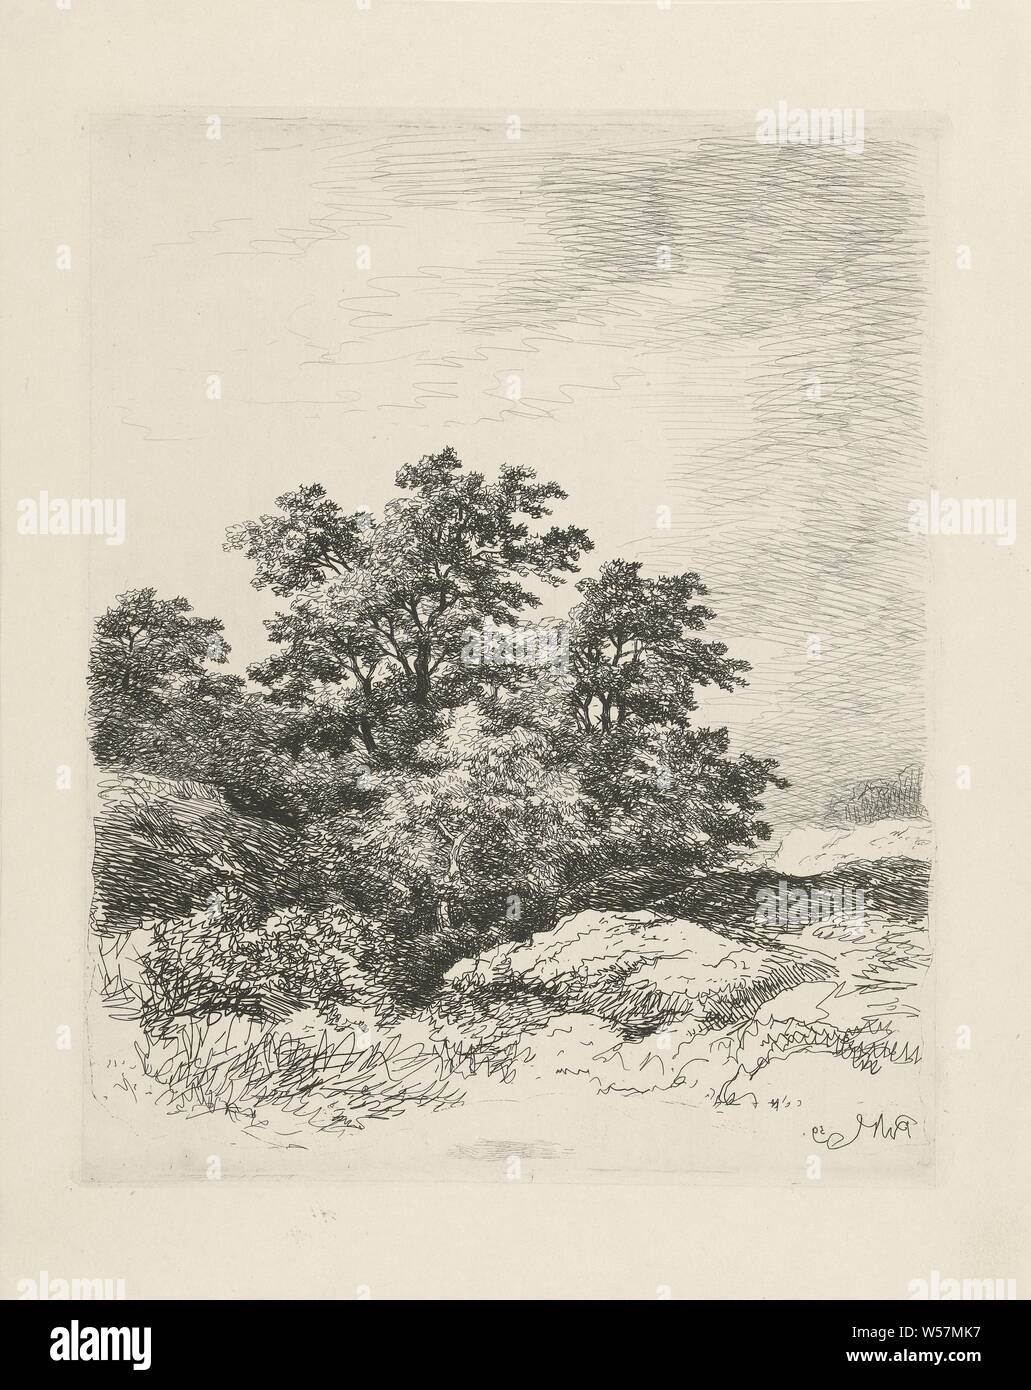 Landscape with trees, trees, Remigius Adrianus Haanen (mentioned on object), Austria, 1859, paper, etching, h 250 mm × w 200 mm Stock Photo